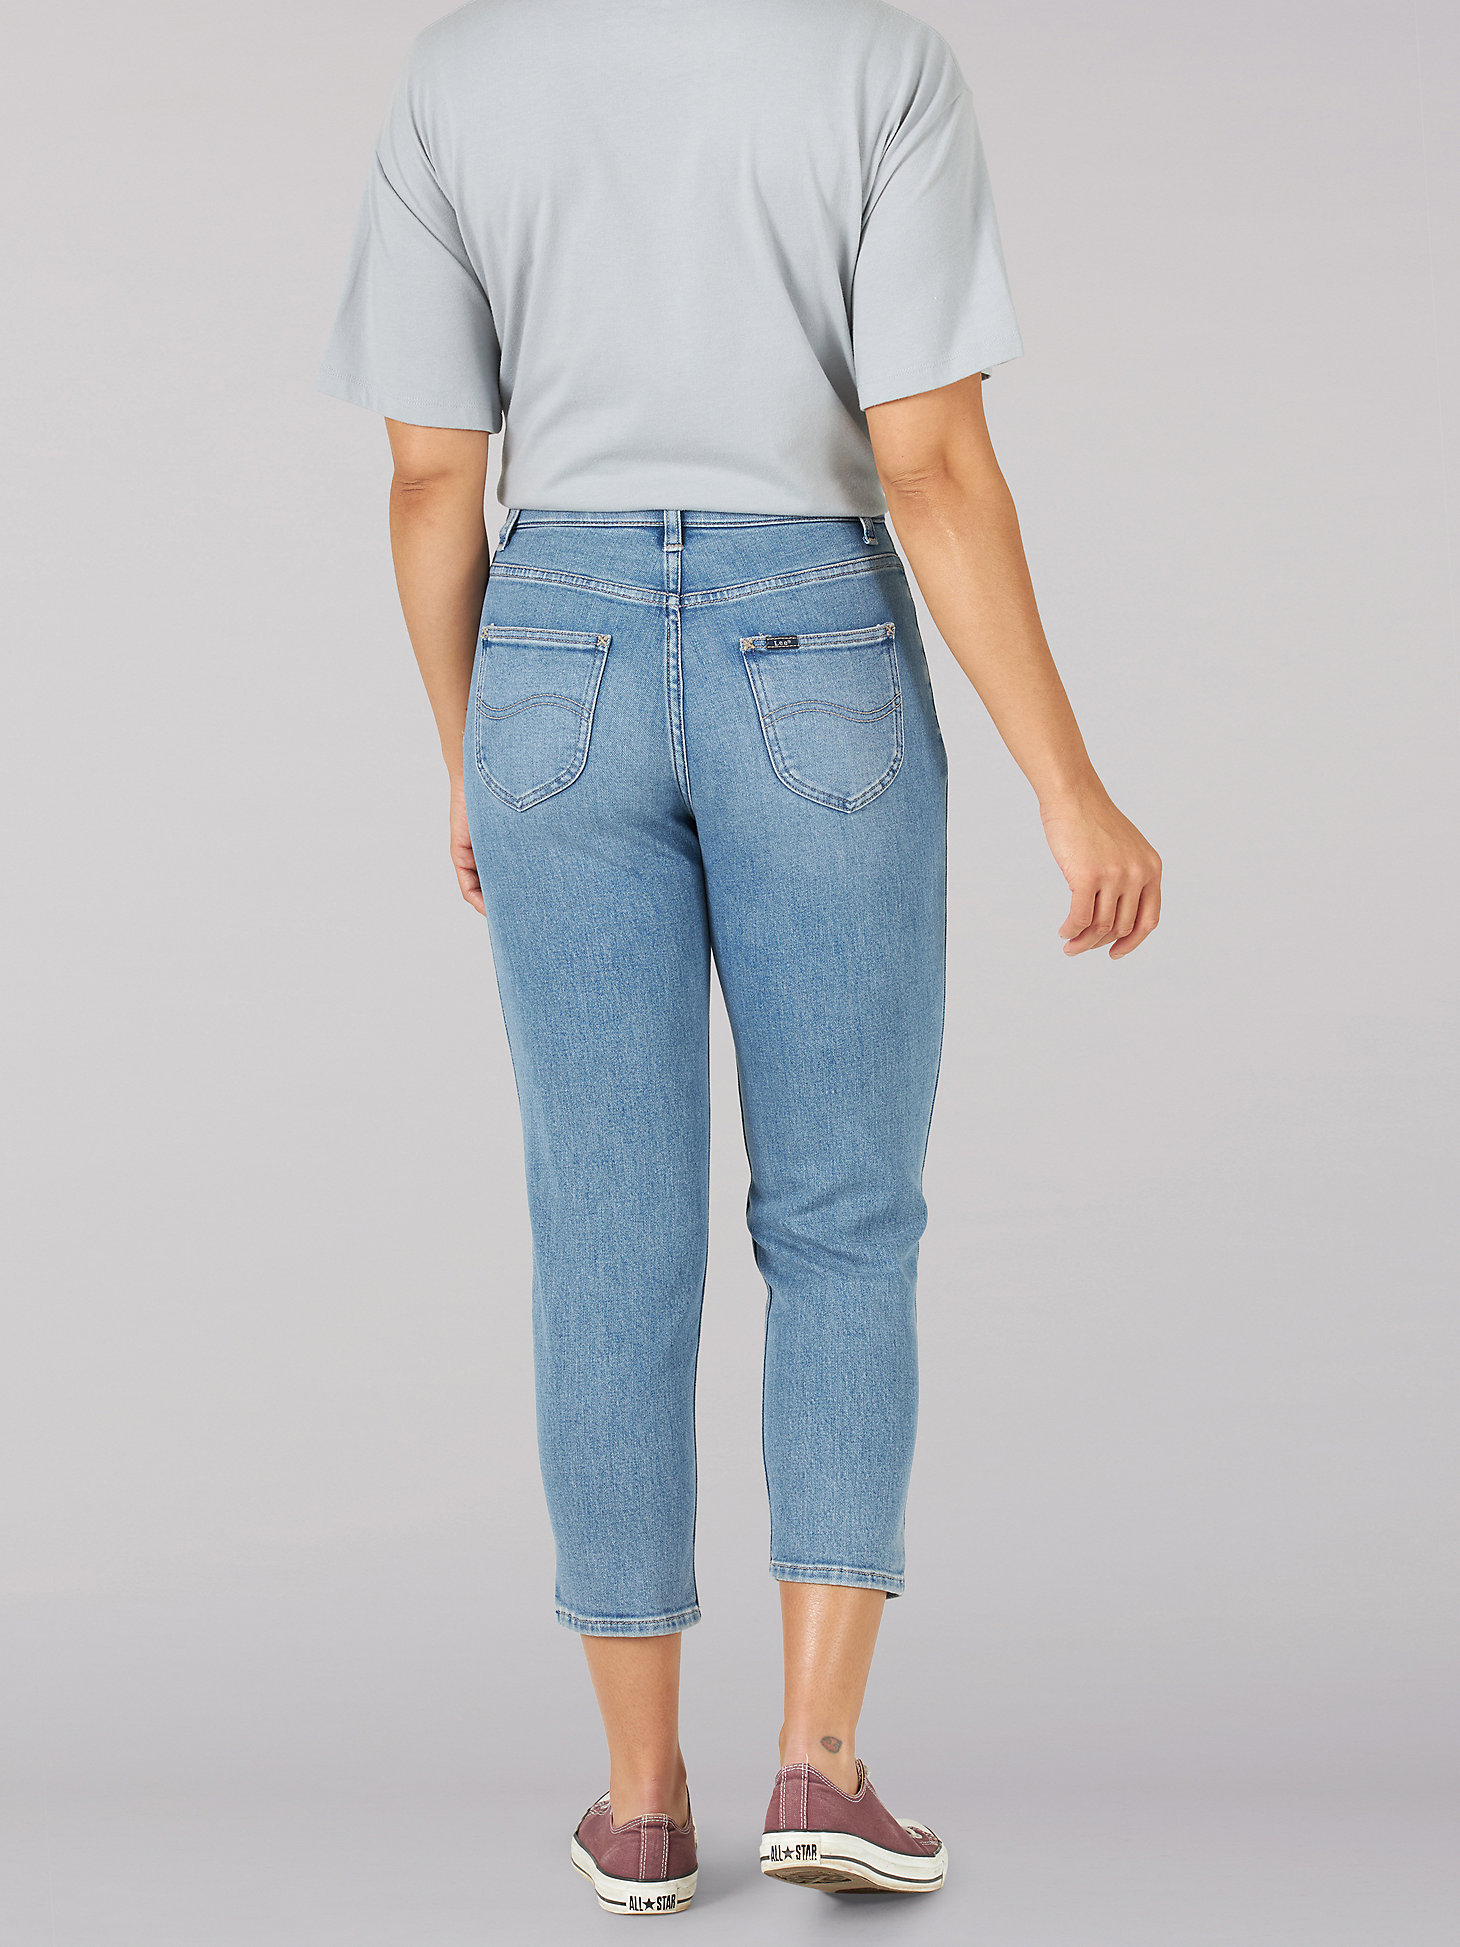 Women's Ultra Lux High Rise Relaxed Fit Tapered Crop Jean in Cloud Indigo alternative view 1